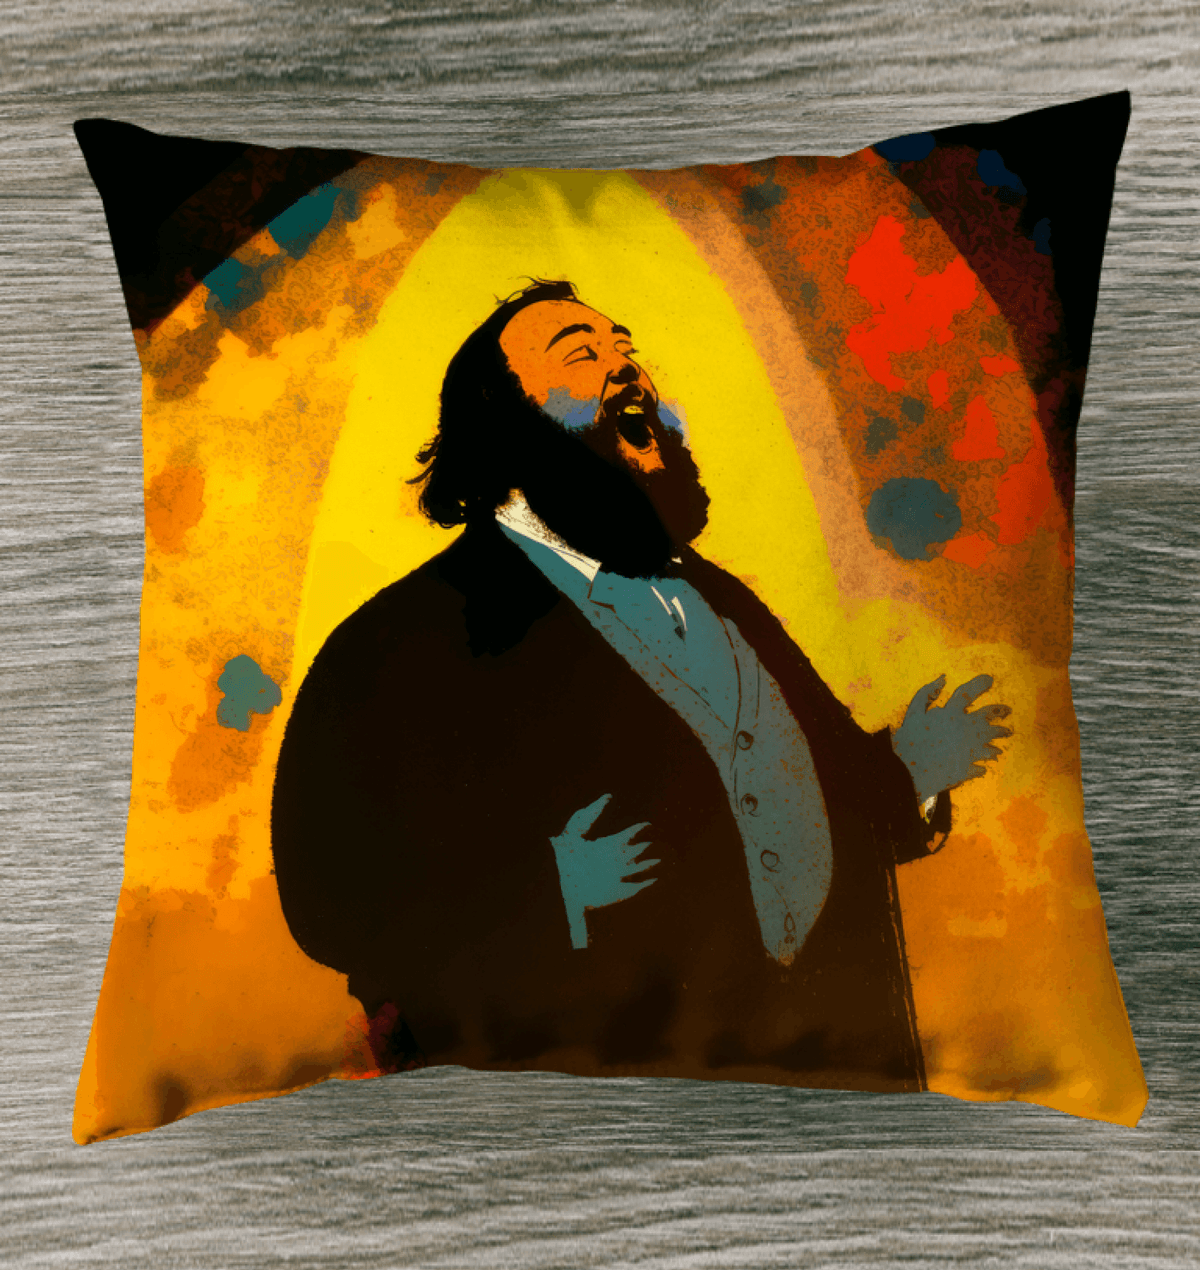 Sophisticated Beat Outdoor Pillow - Beyond T-shirts